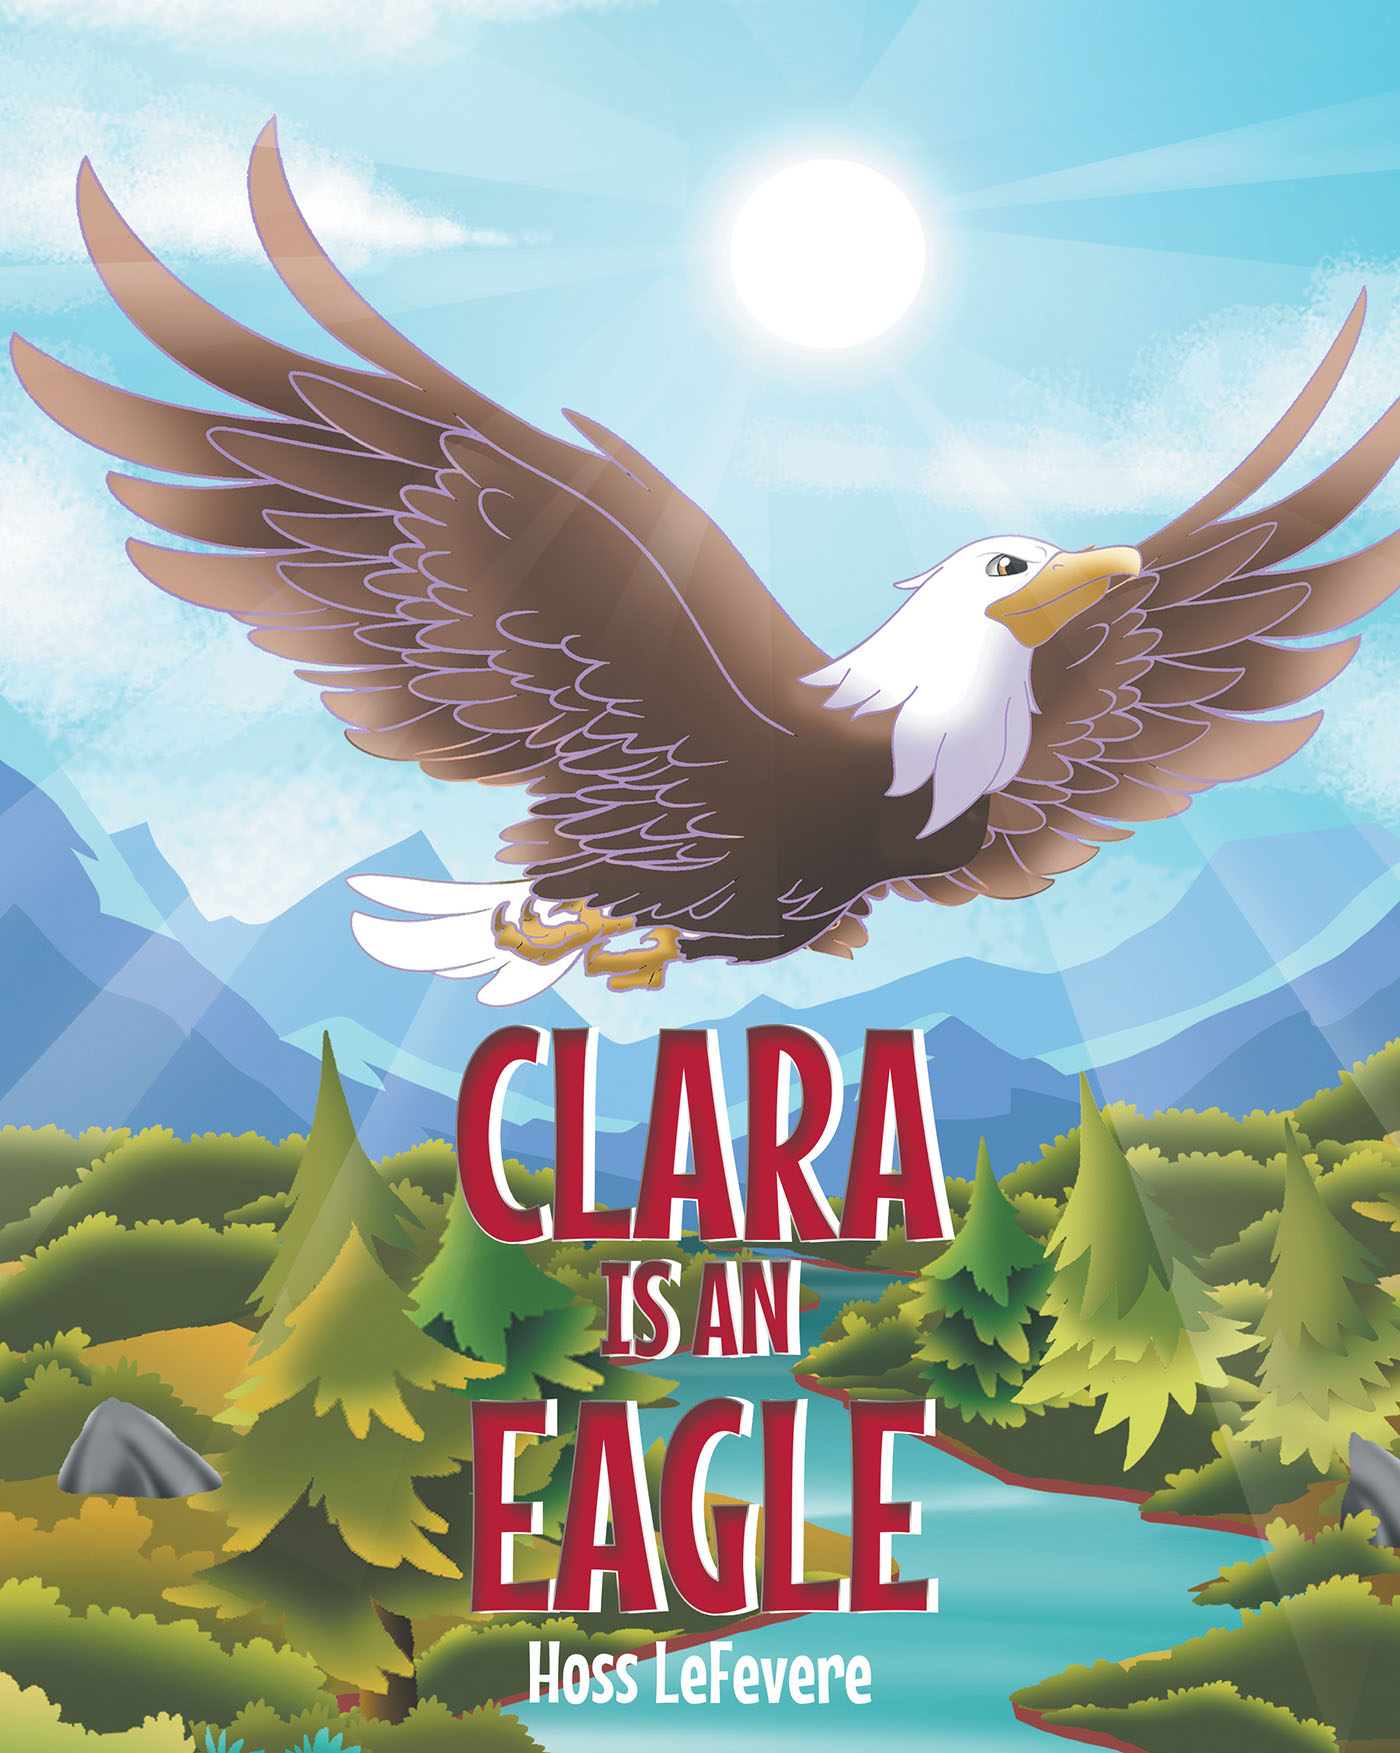 Author Hoss LeFevere’s New Book, “Clara Is an Eagle,” Tells the Incredible Story of Clara, Who Always Thought She Was a Chicken, But Wakes Up as an Eagle One Day